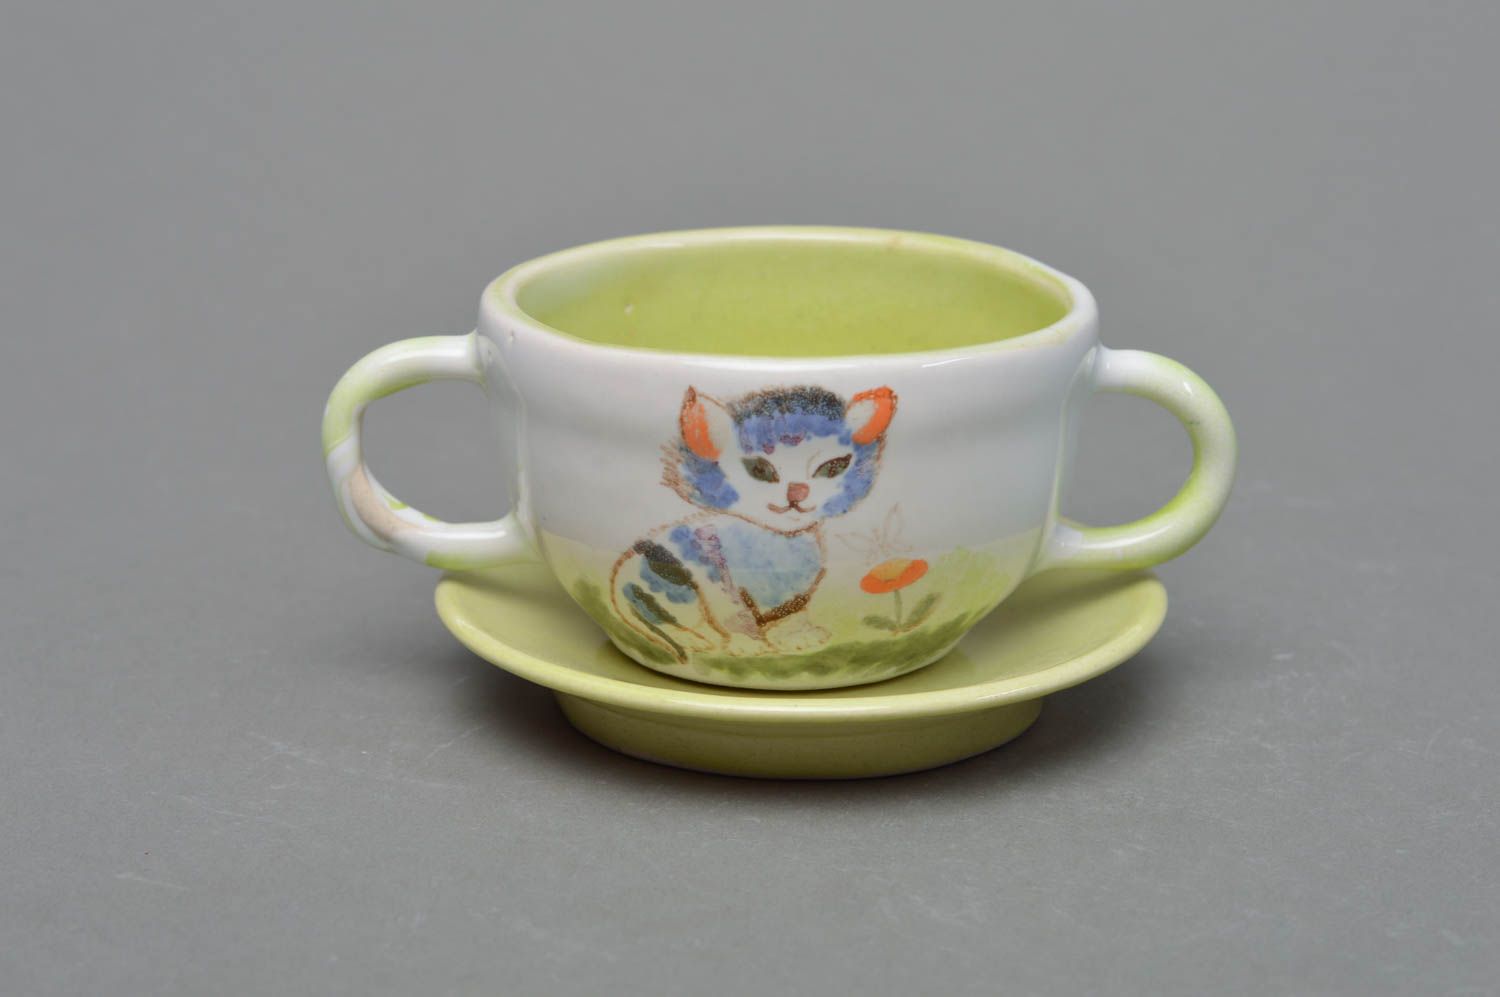 Porcelain drinking 5 oz cup with two handles and a saucer with hand-painted kitty pattern photo 1